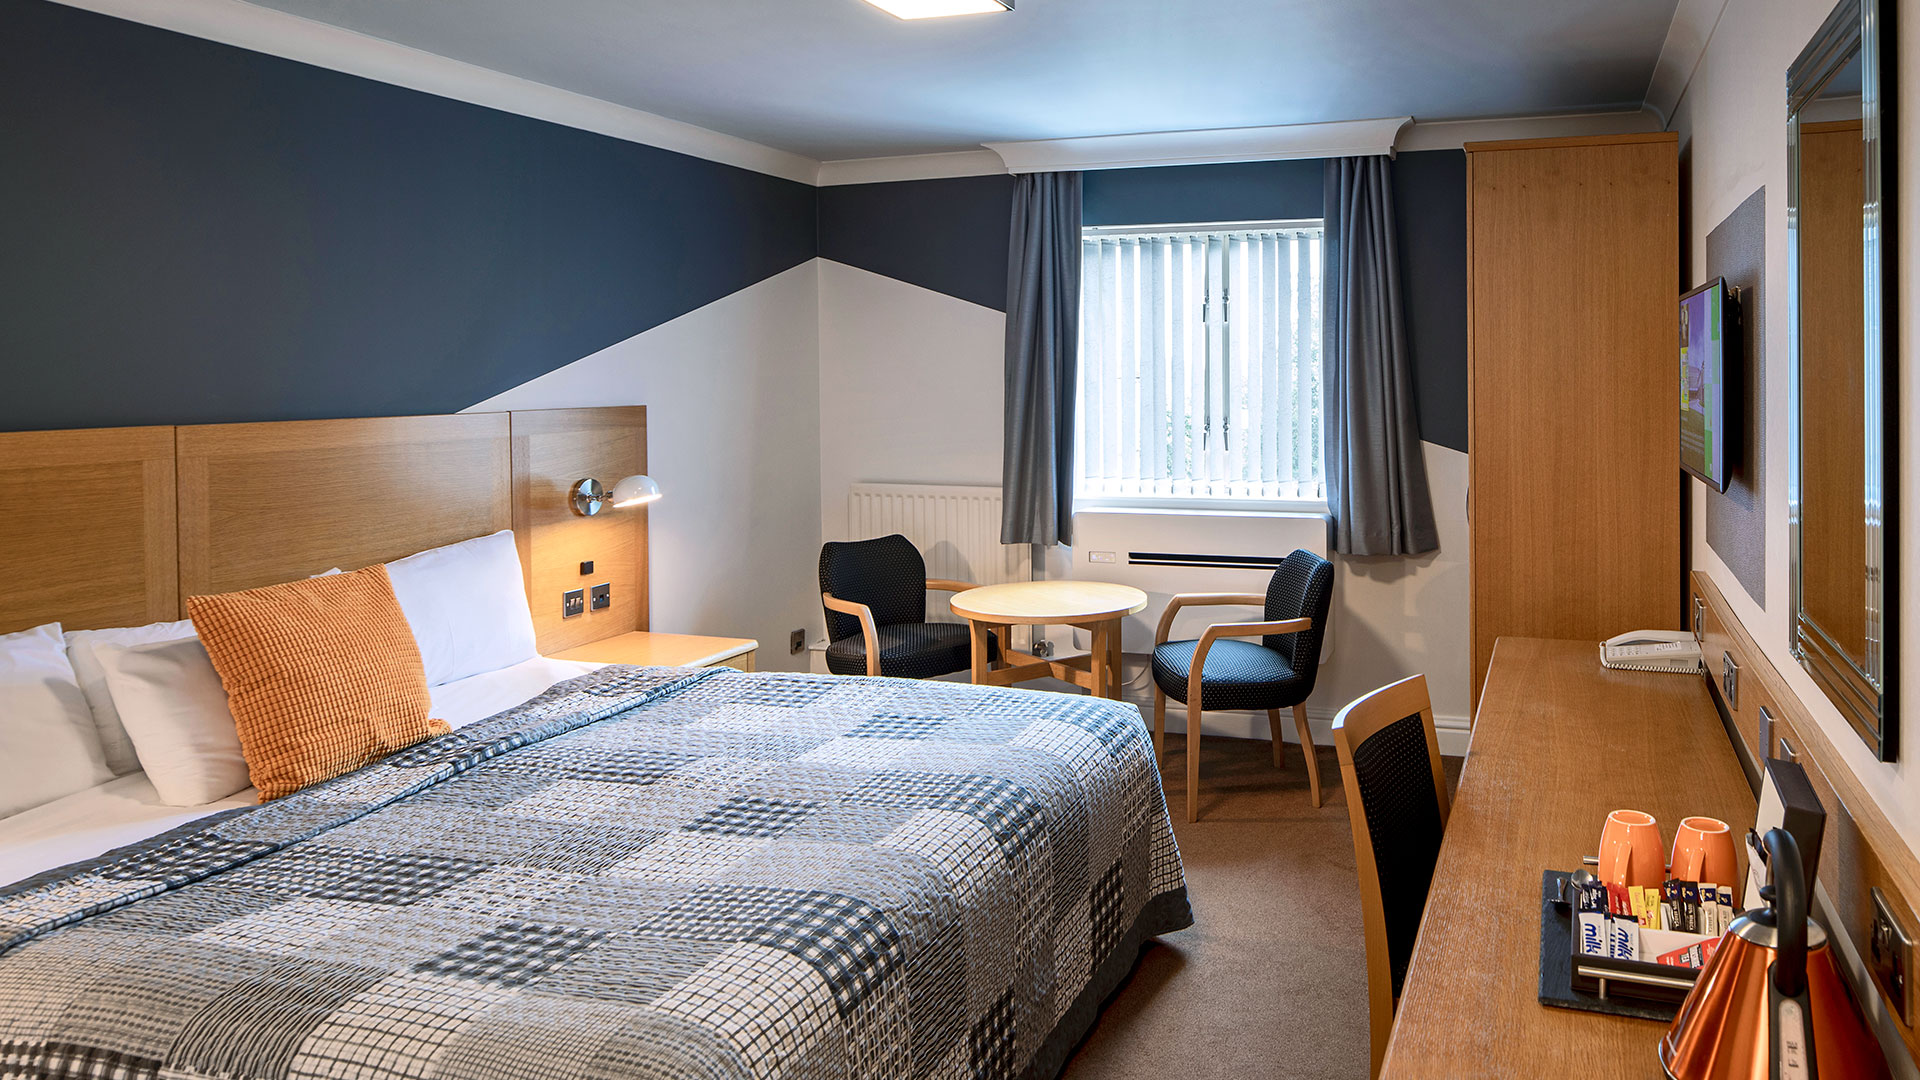 Superior Double Room - Weetwood Hall Hotel, Leeds.